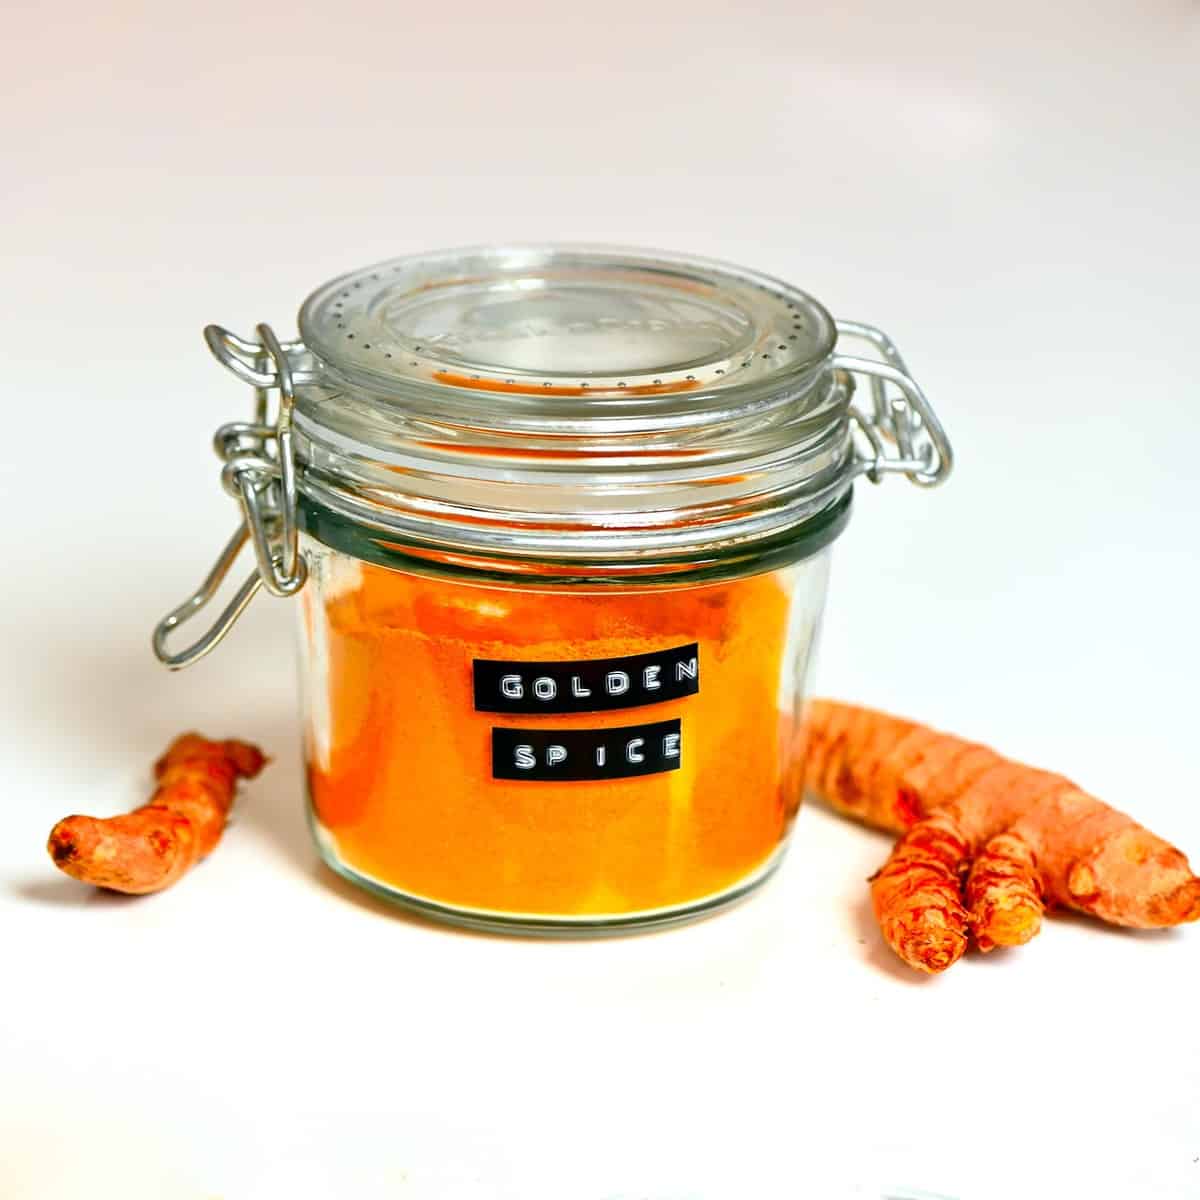 https://www.alphafoodie.com/wp-content/uploads/2020/07/jar-of-golden-spice-mix-with-turmeric-roots-on-the-side.jpeg